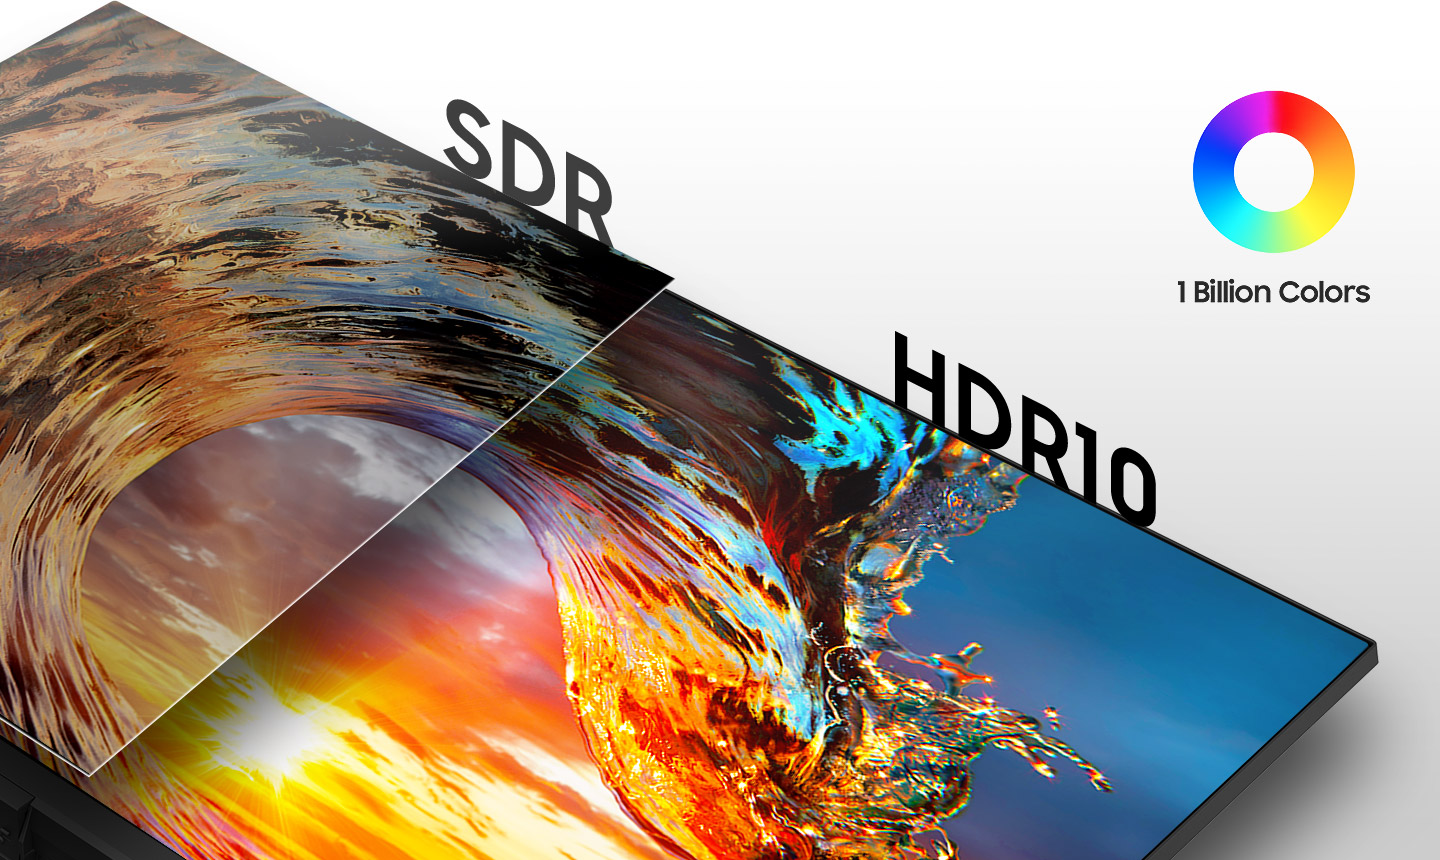 Enjoy a billion colors with incredible depth 1 billion colors with HDR 10